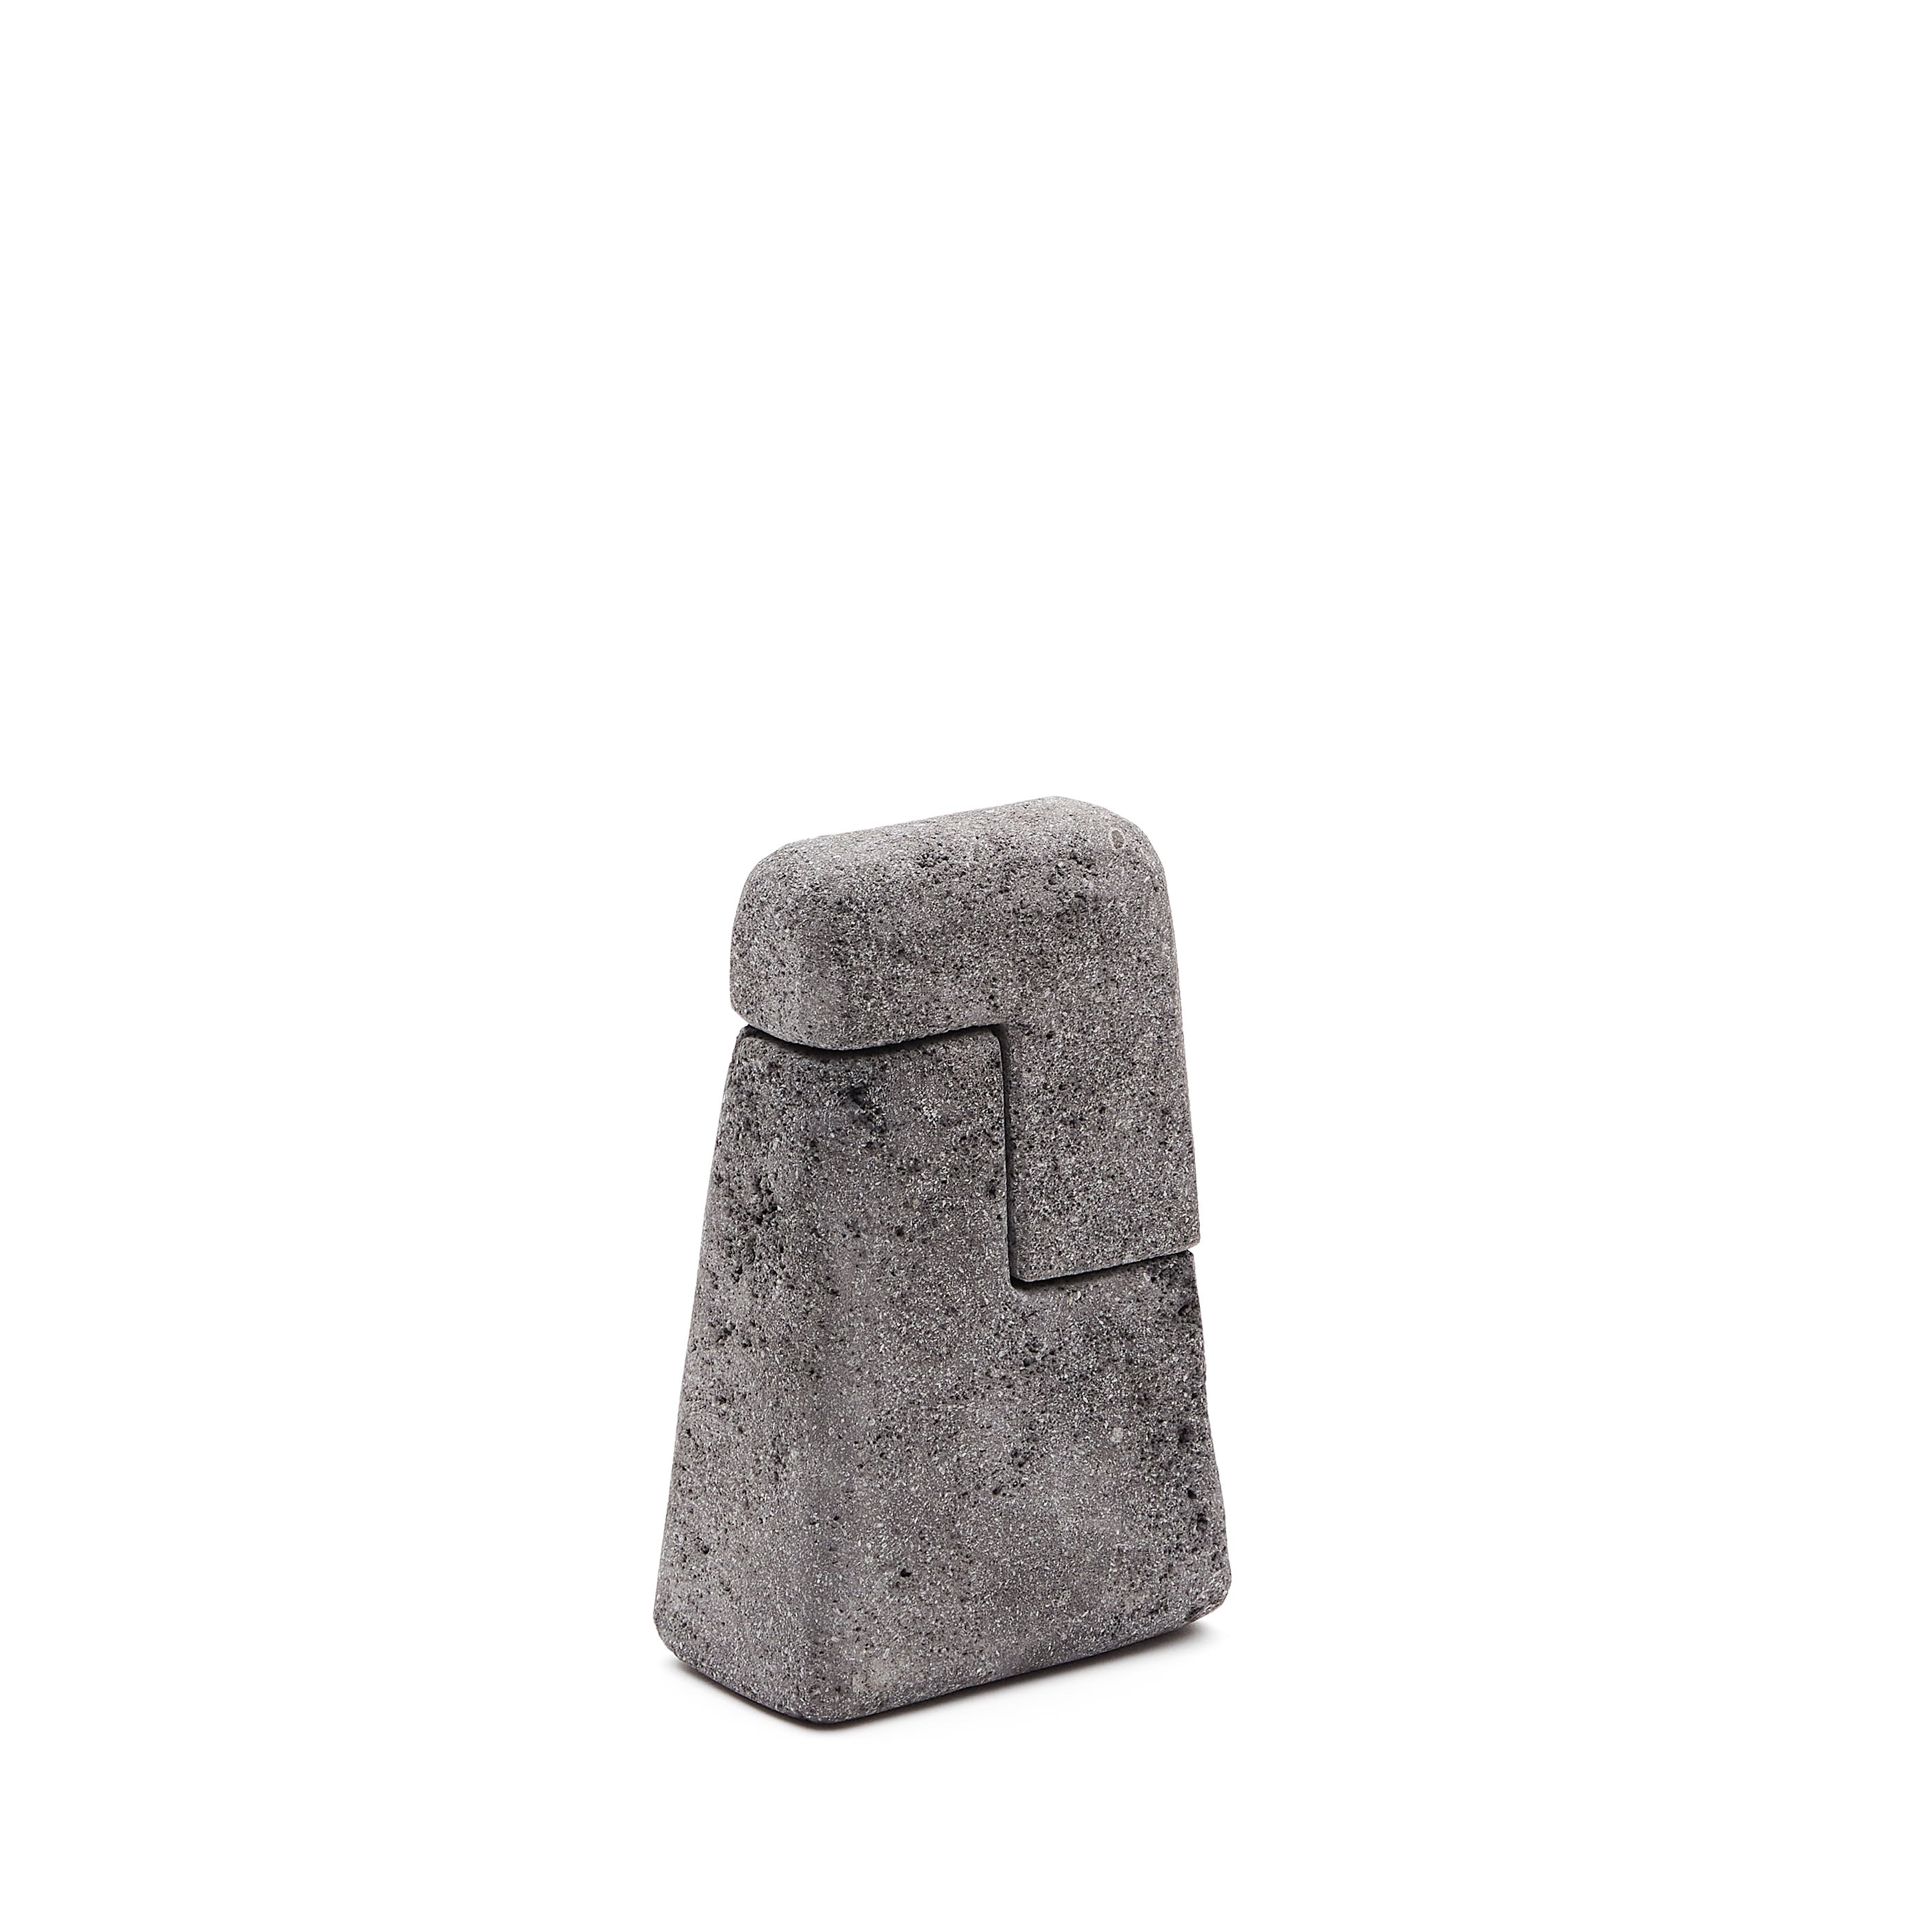 Sipa stone statue with natural finish 20 cm